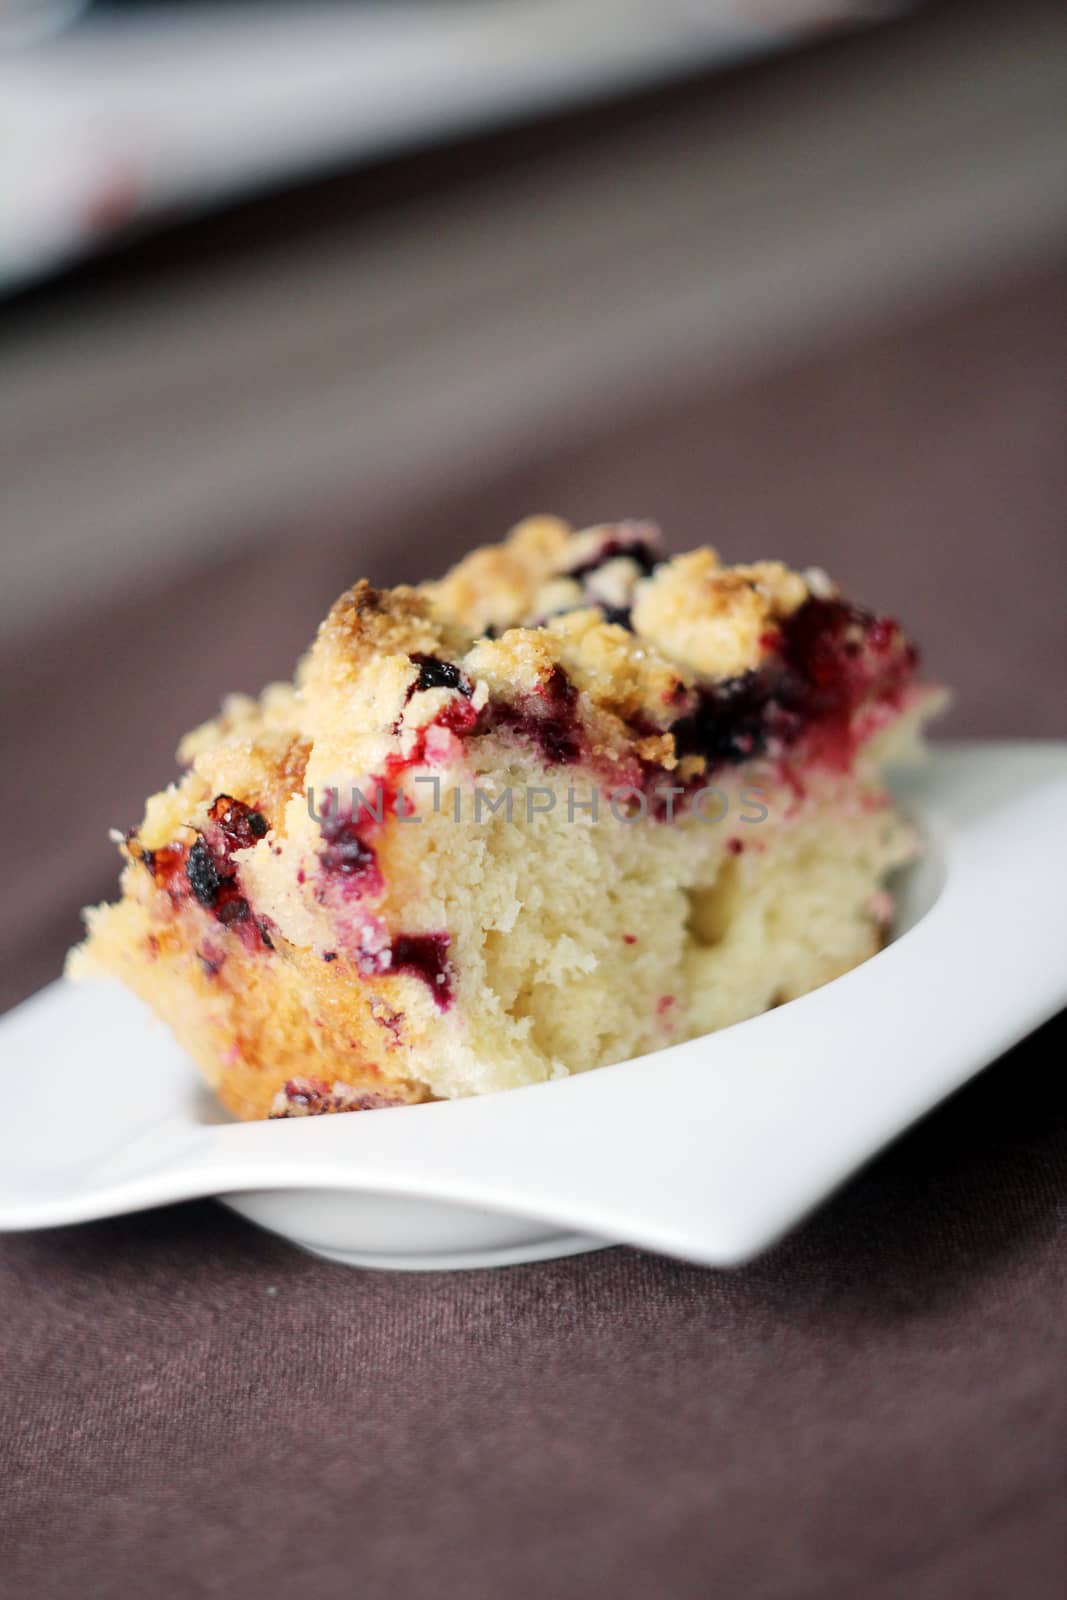 Traditional yeast cake with crumble topping and black currant by sanzios